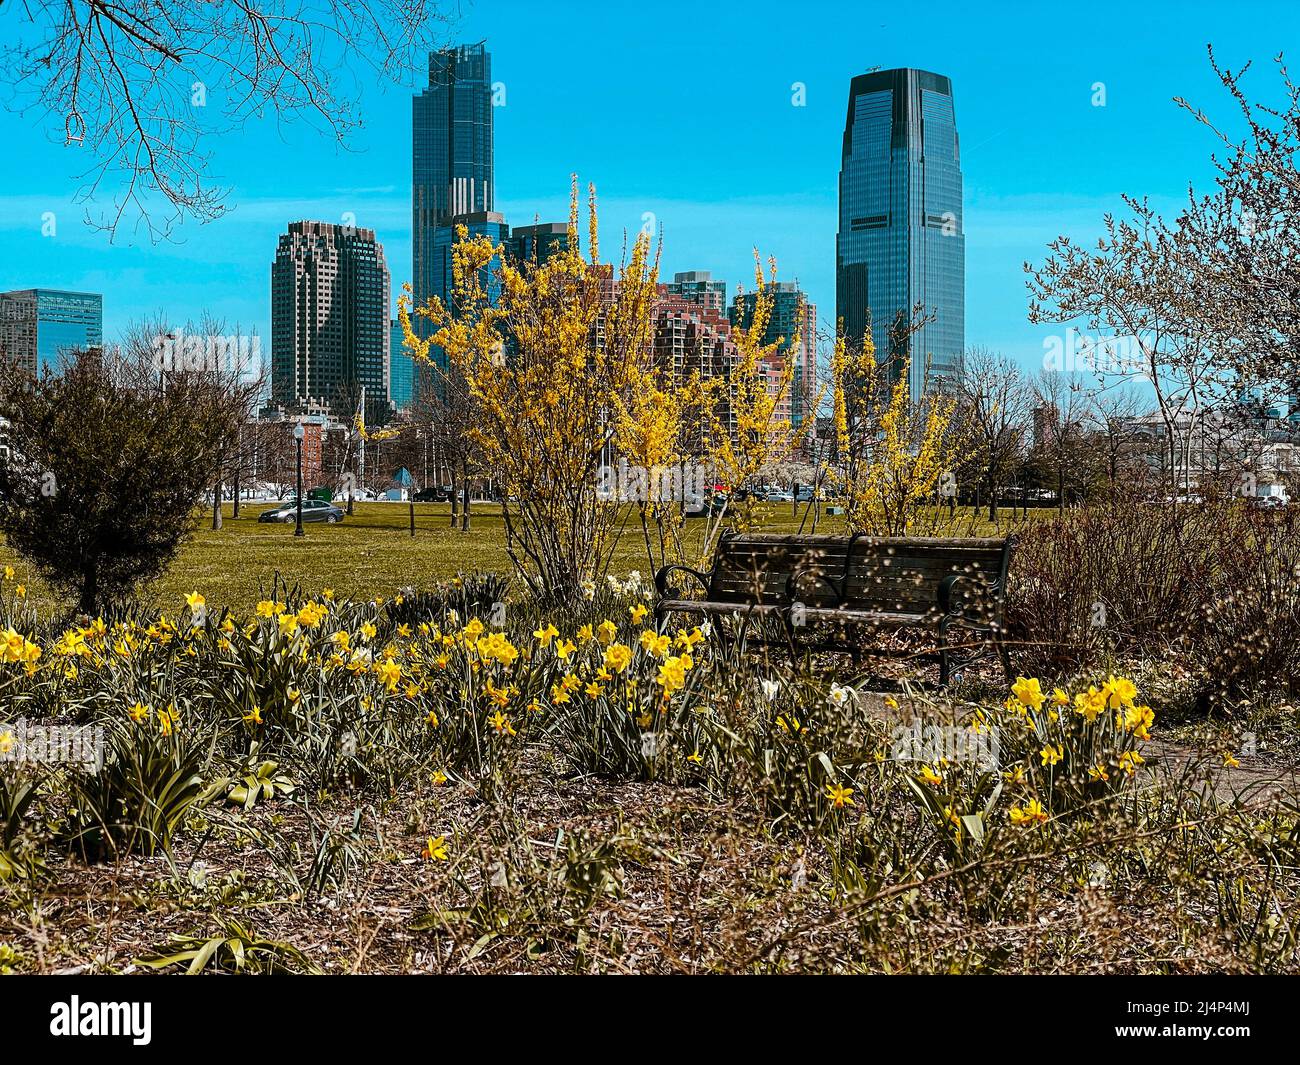 Skyline of Jersey City as seen from Liberty State Park. Background shows Goldman Sachs building. Foreground with bench and spring flowers Stock Photo